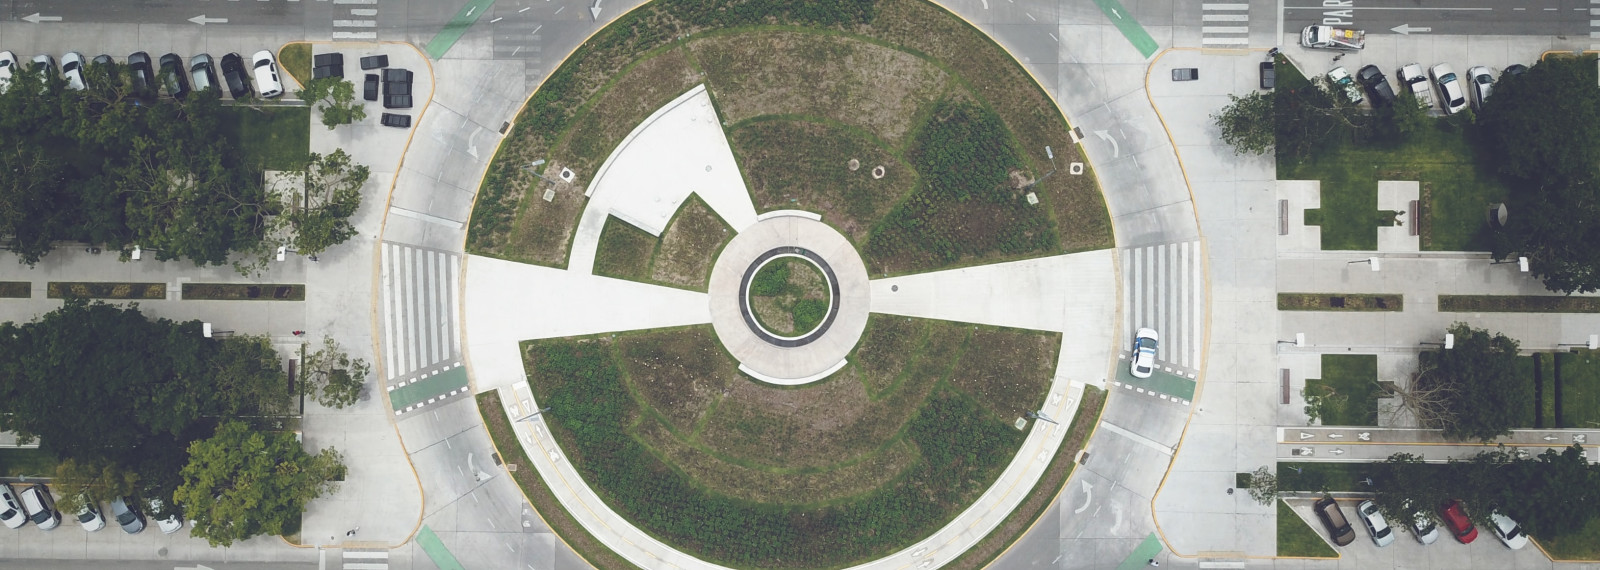 Aerial view of a circular roundabout